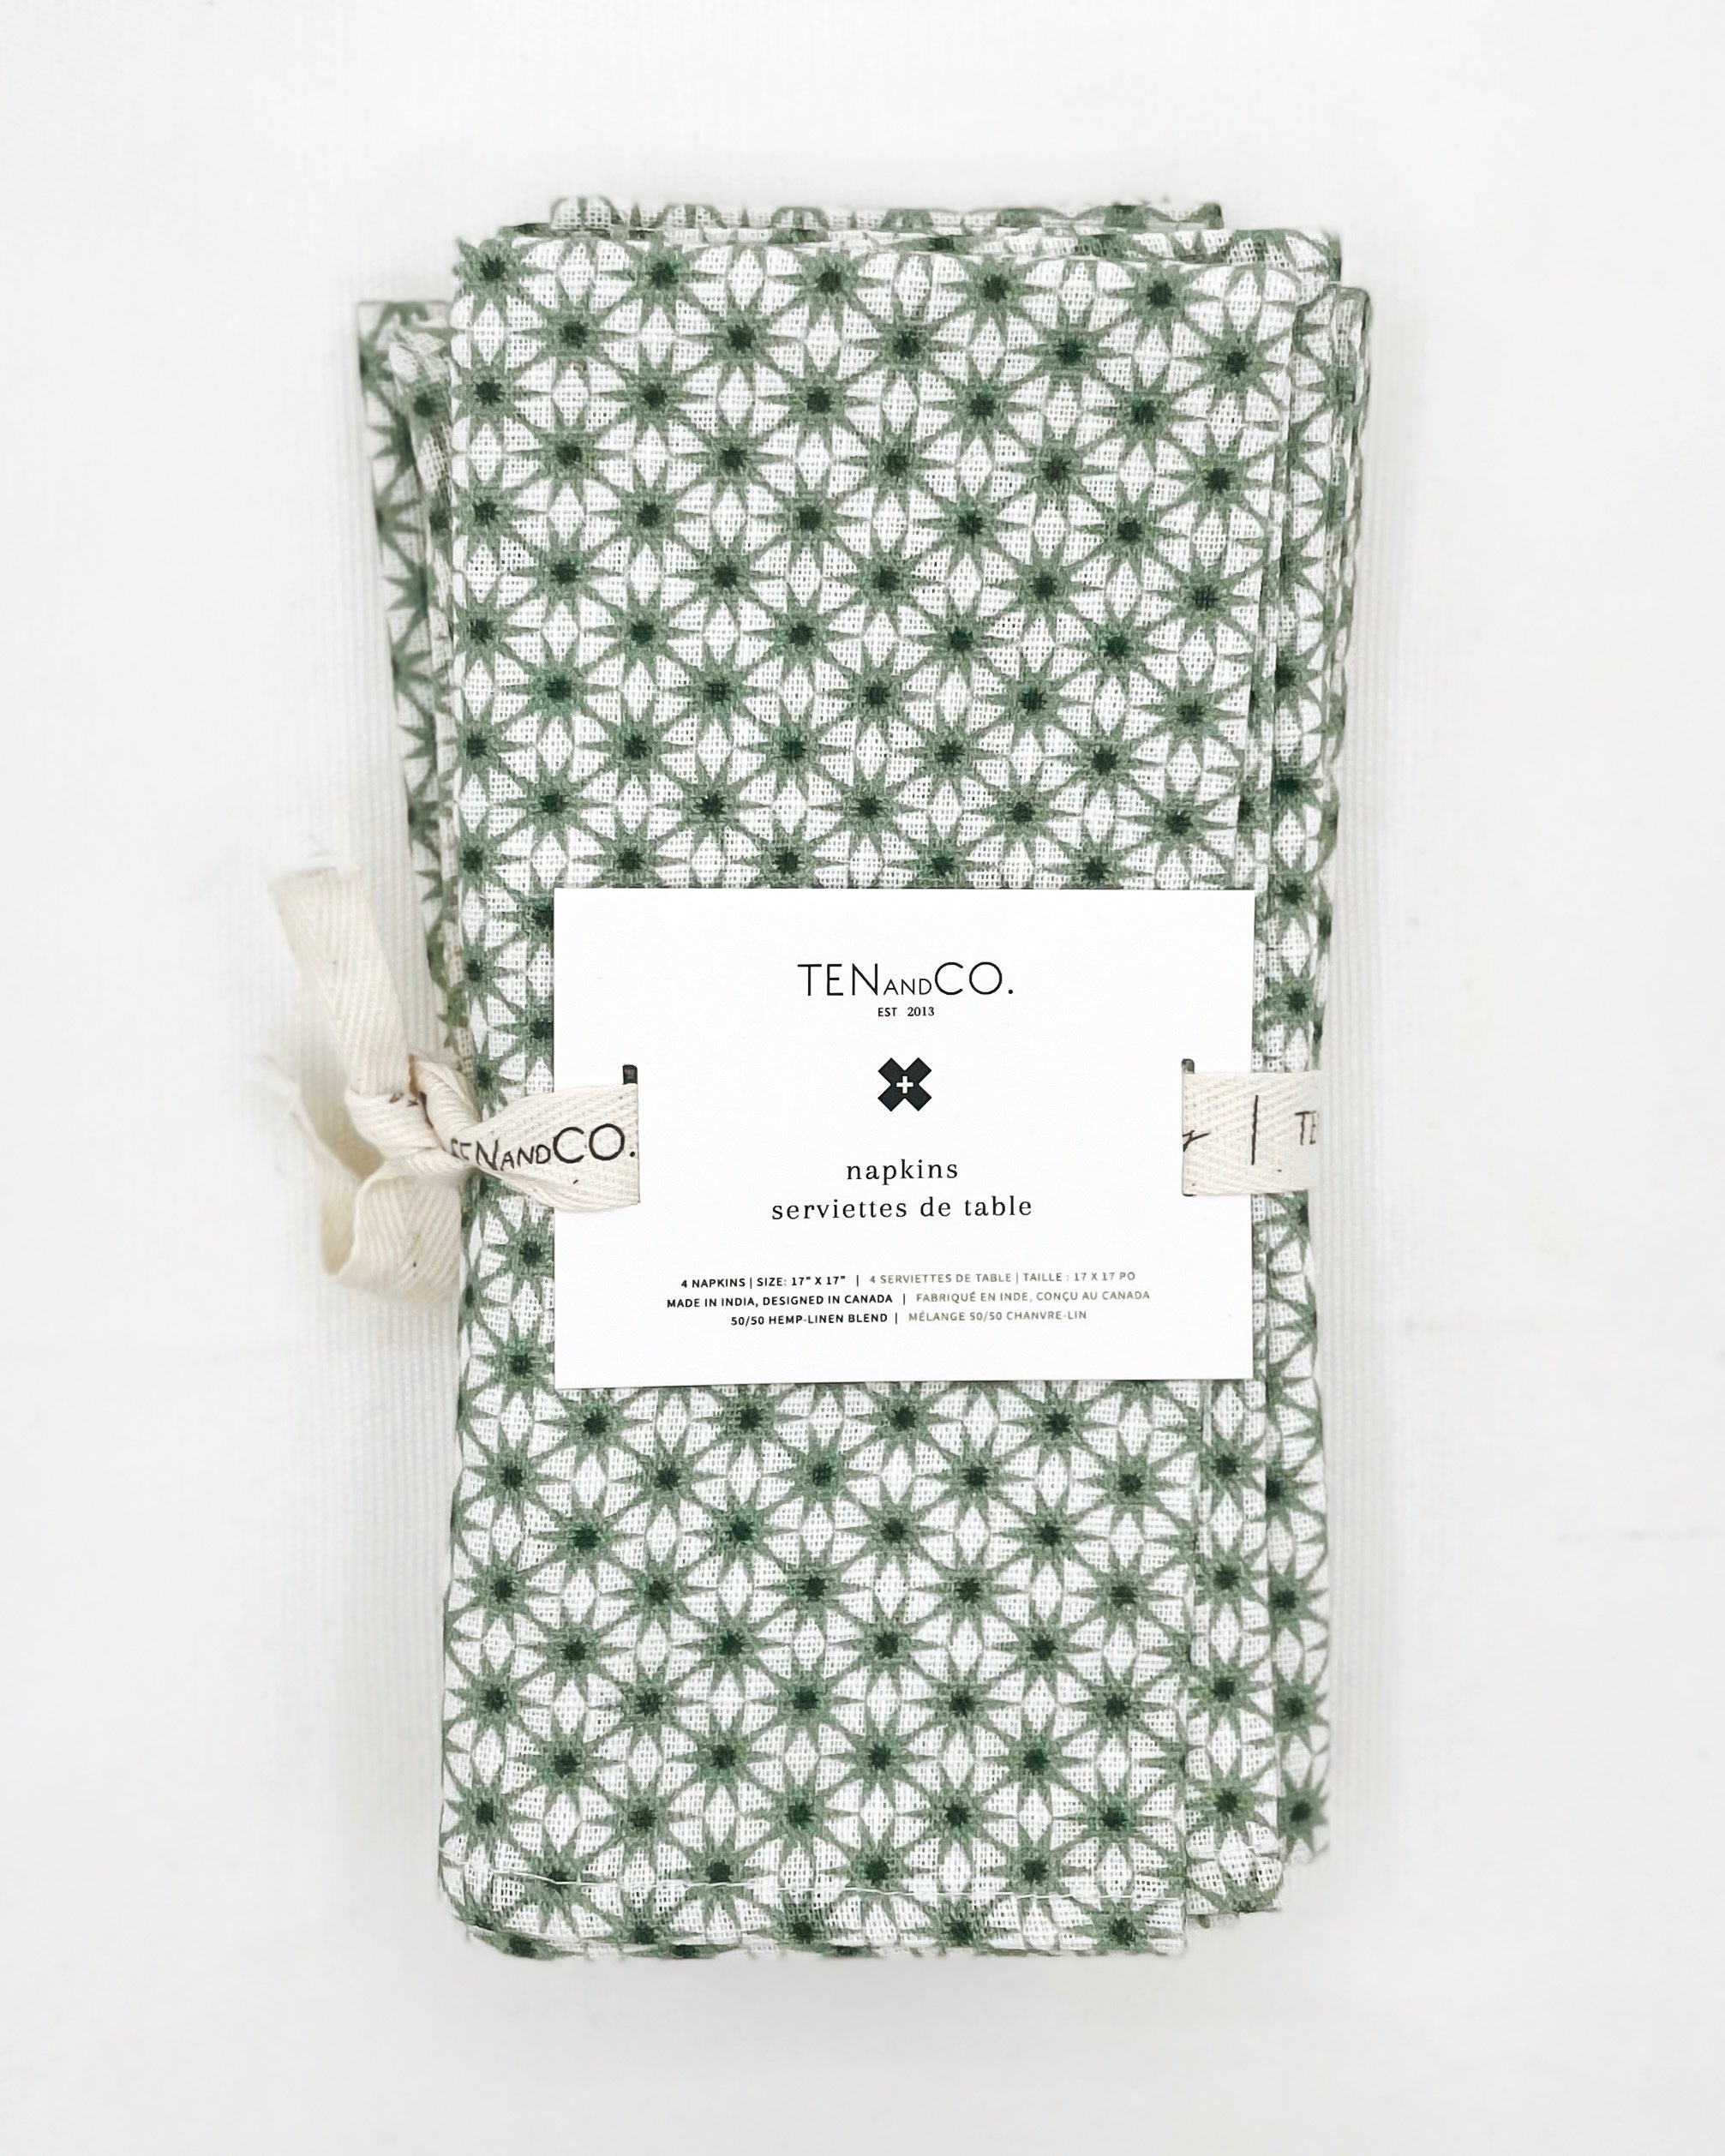 Flat lay image of Starburst Sage, 4 set of Napkins on a white background. The napkins have a white base colour with starbursts of green covering the entirety of the cloth and are tied together with Ten and Co twill tape and a recyclable paper tag laying on top.